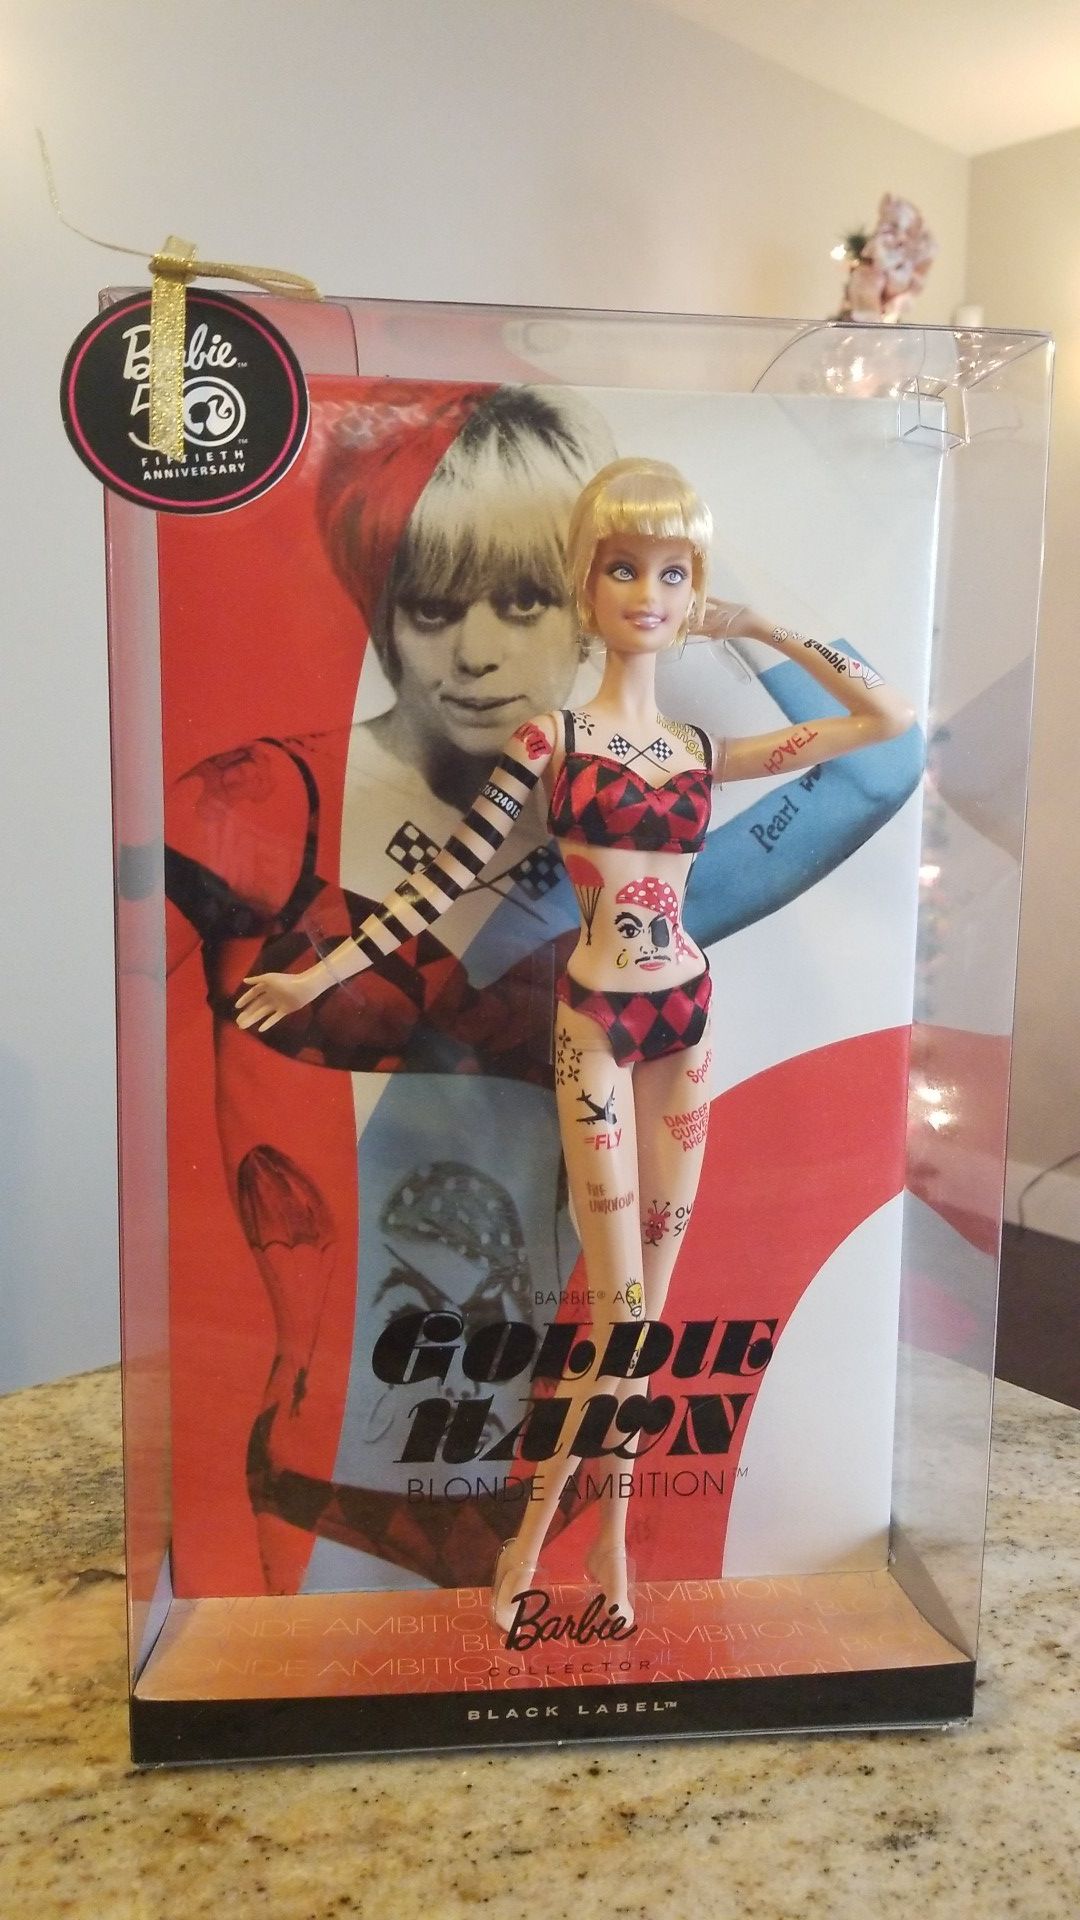 Retro Goldie Hawn 50th Anniversary Collectible Barbie Excellent Condition